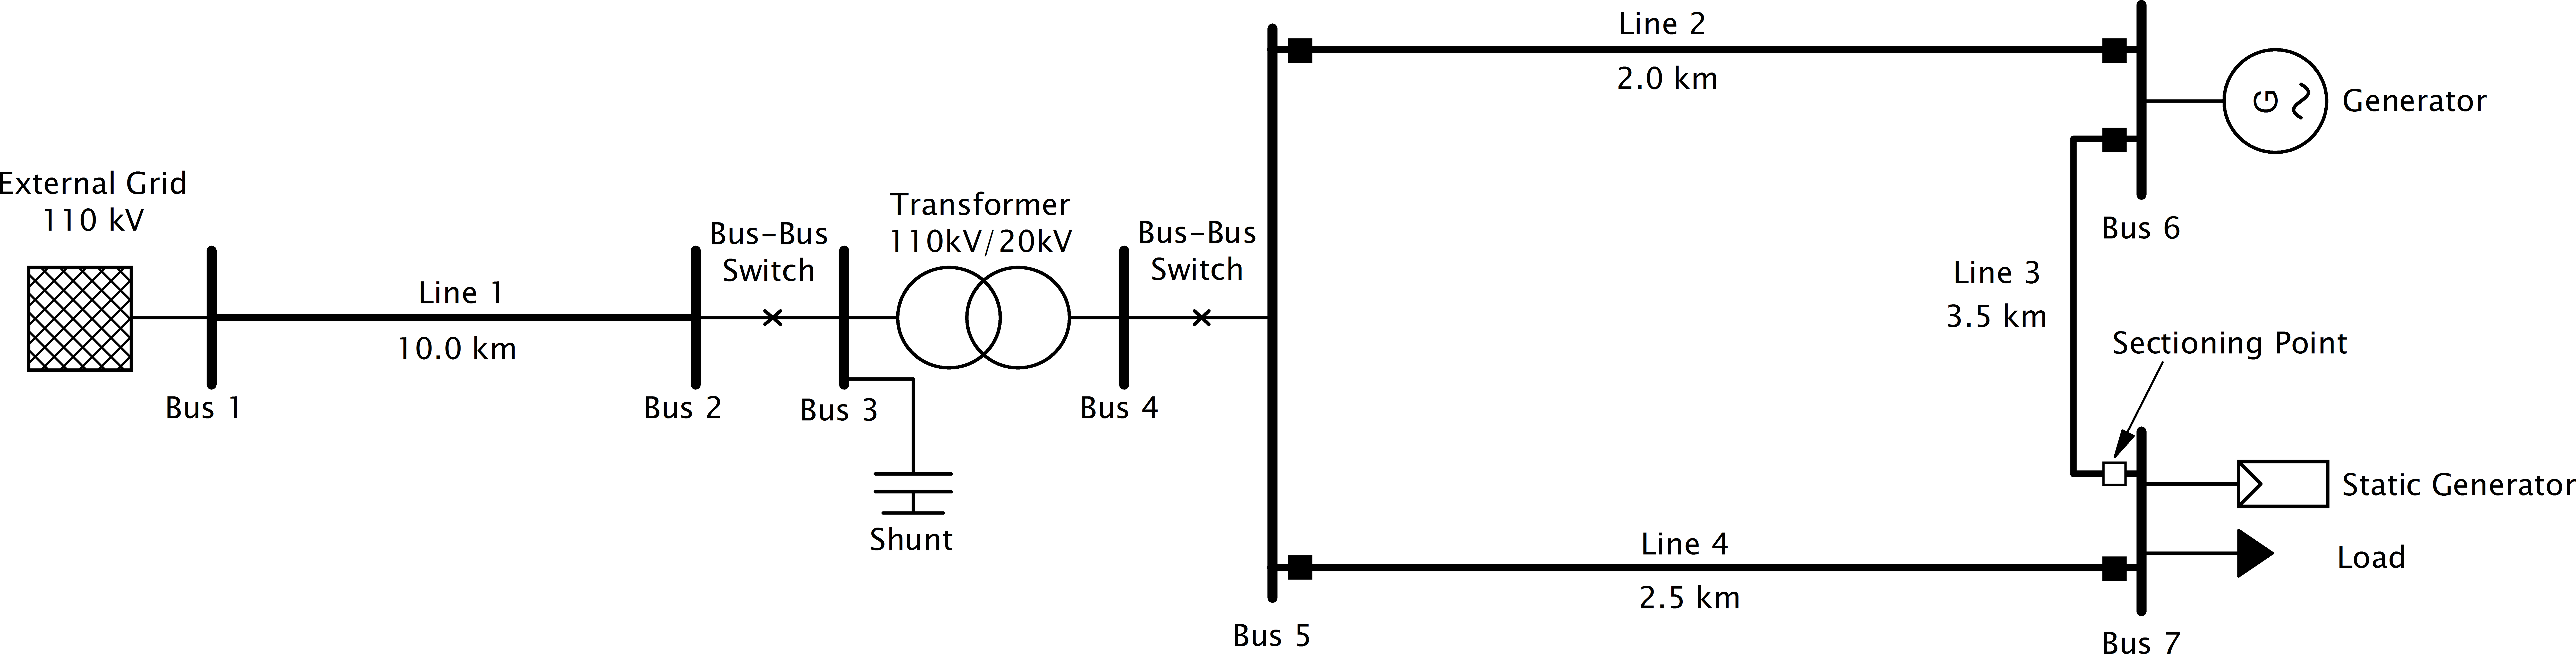 example_network_simple.png